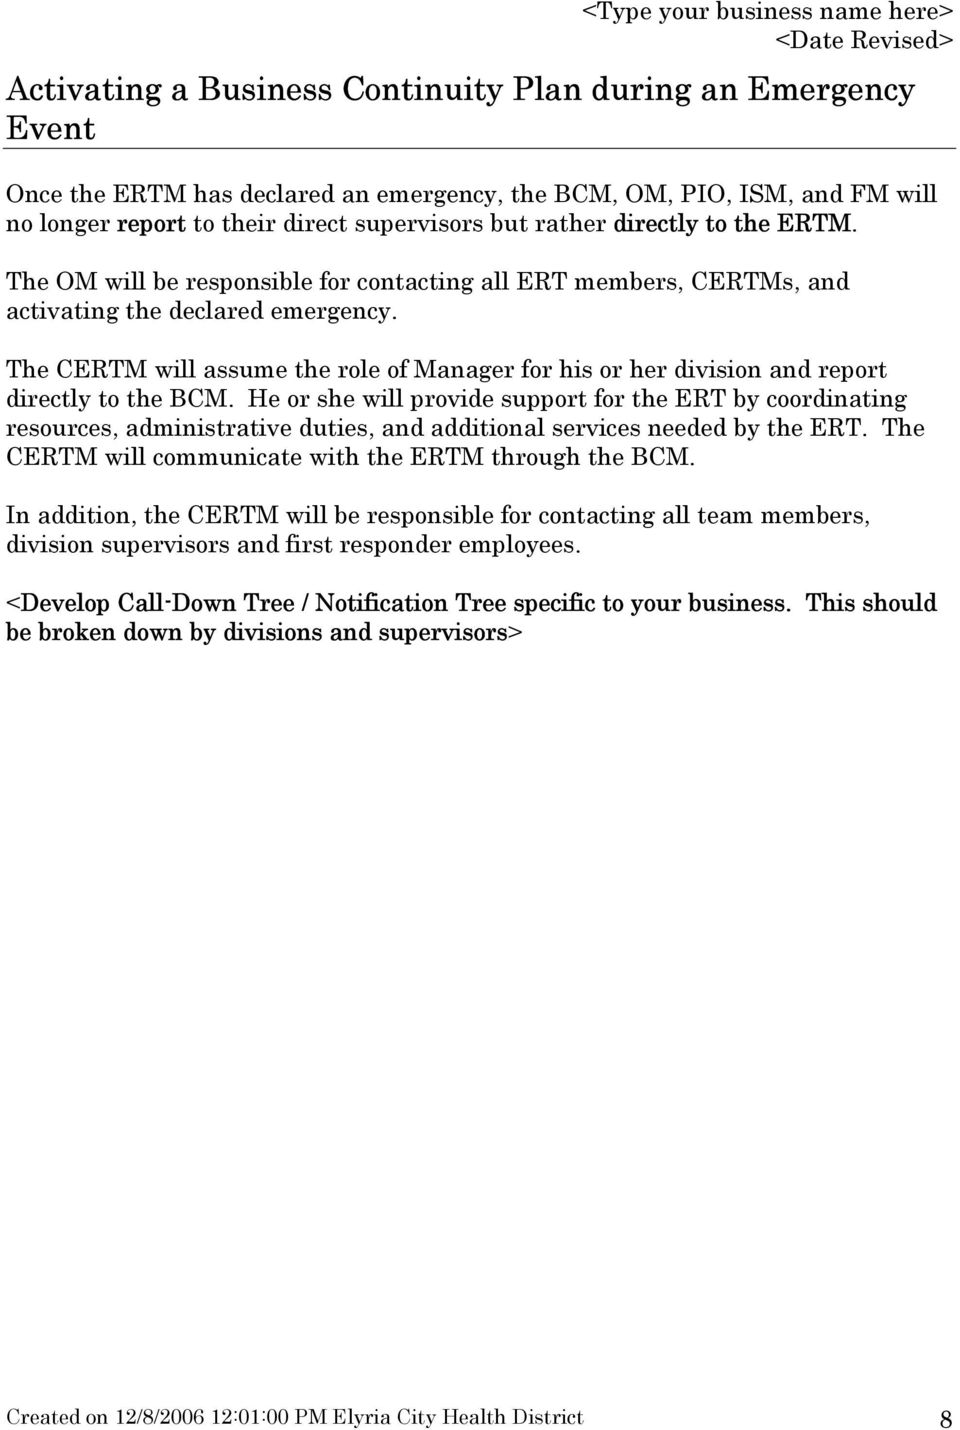 The CERTM will assume the role of Manager for his or her division and report directly to the BCM.